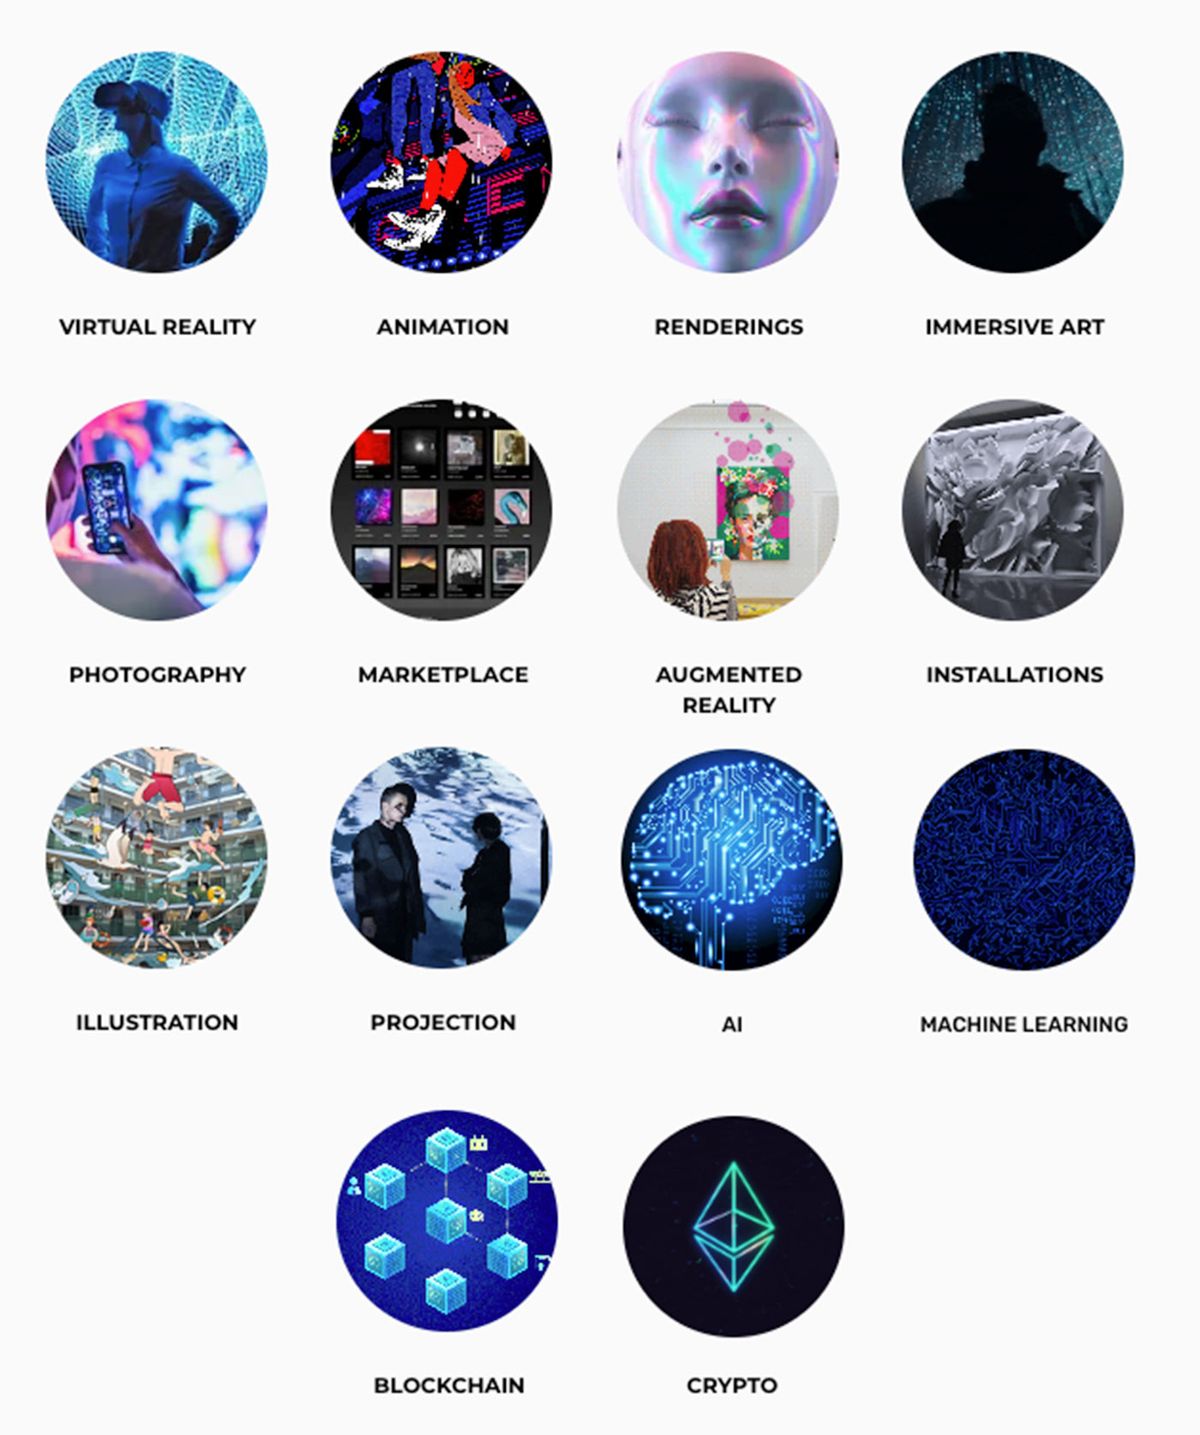 The Hong Kong-based Digital Art Fair lists and explores 14 different categories of digital art